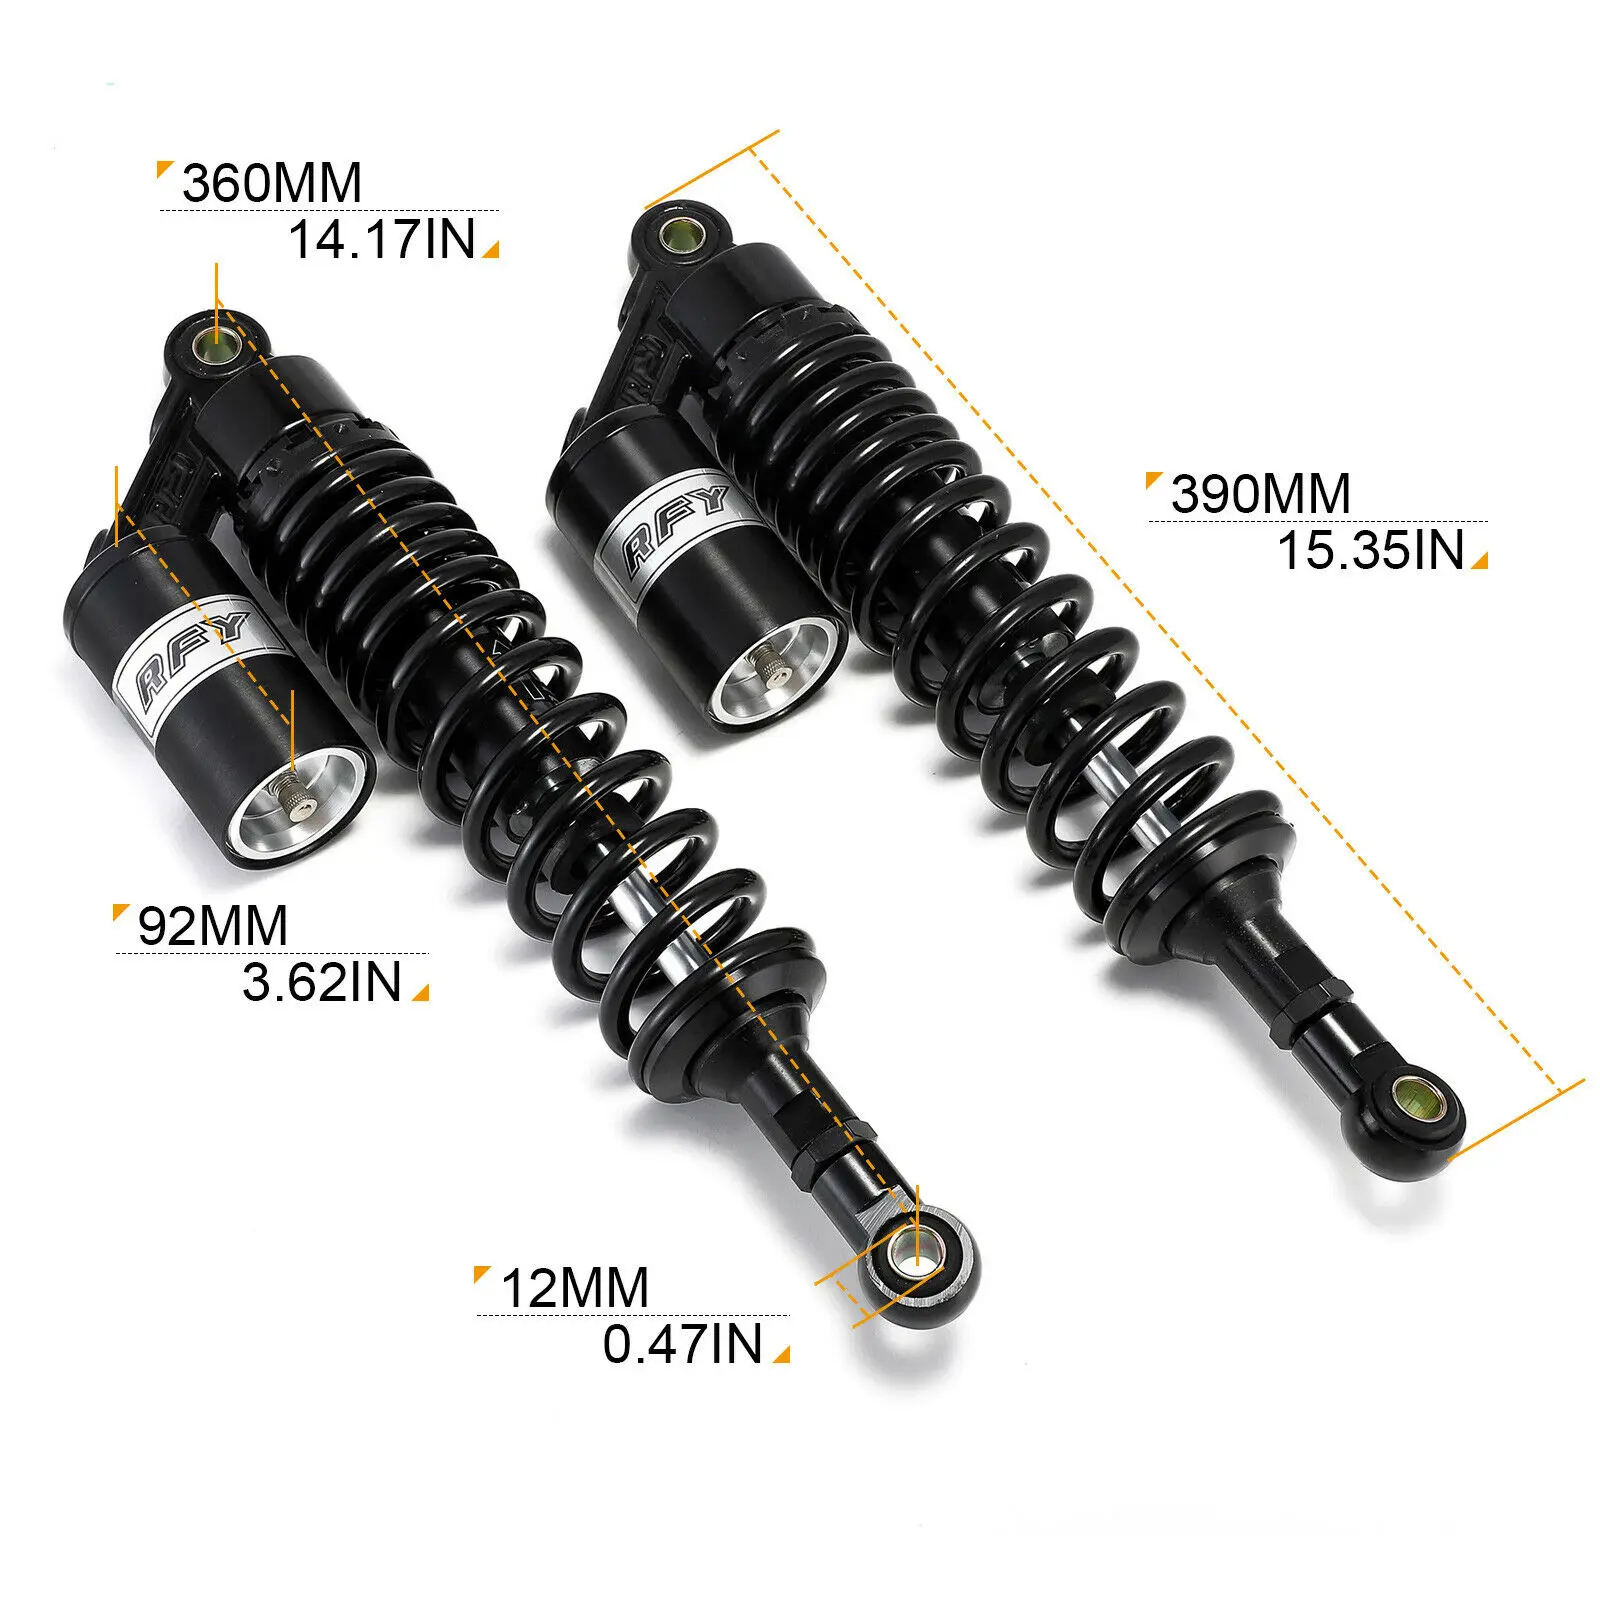 white 2 pieces Universal 360mm Spring 7mm Motorcycle Air Shock Absorber Rear Suspension ATV